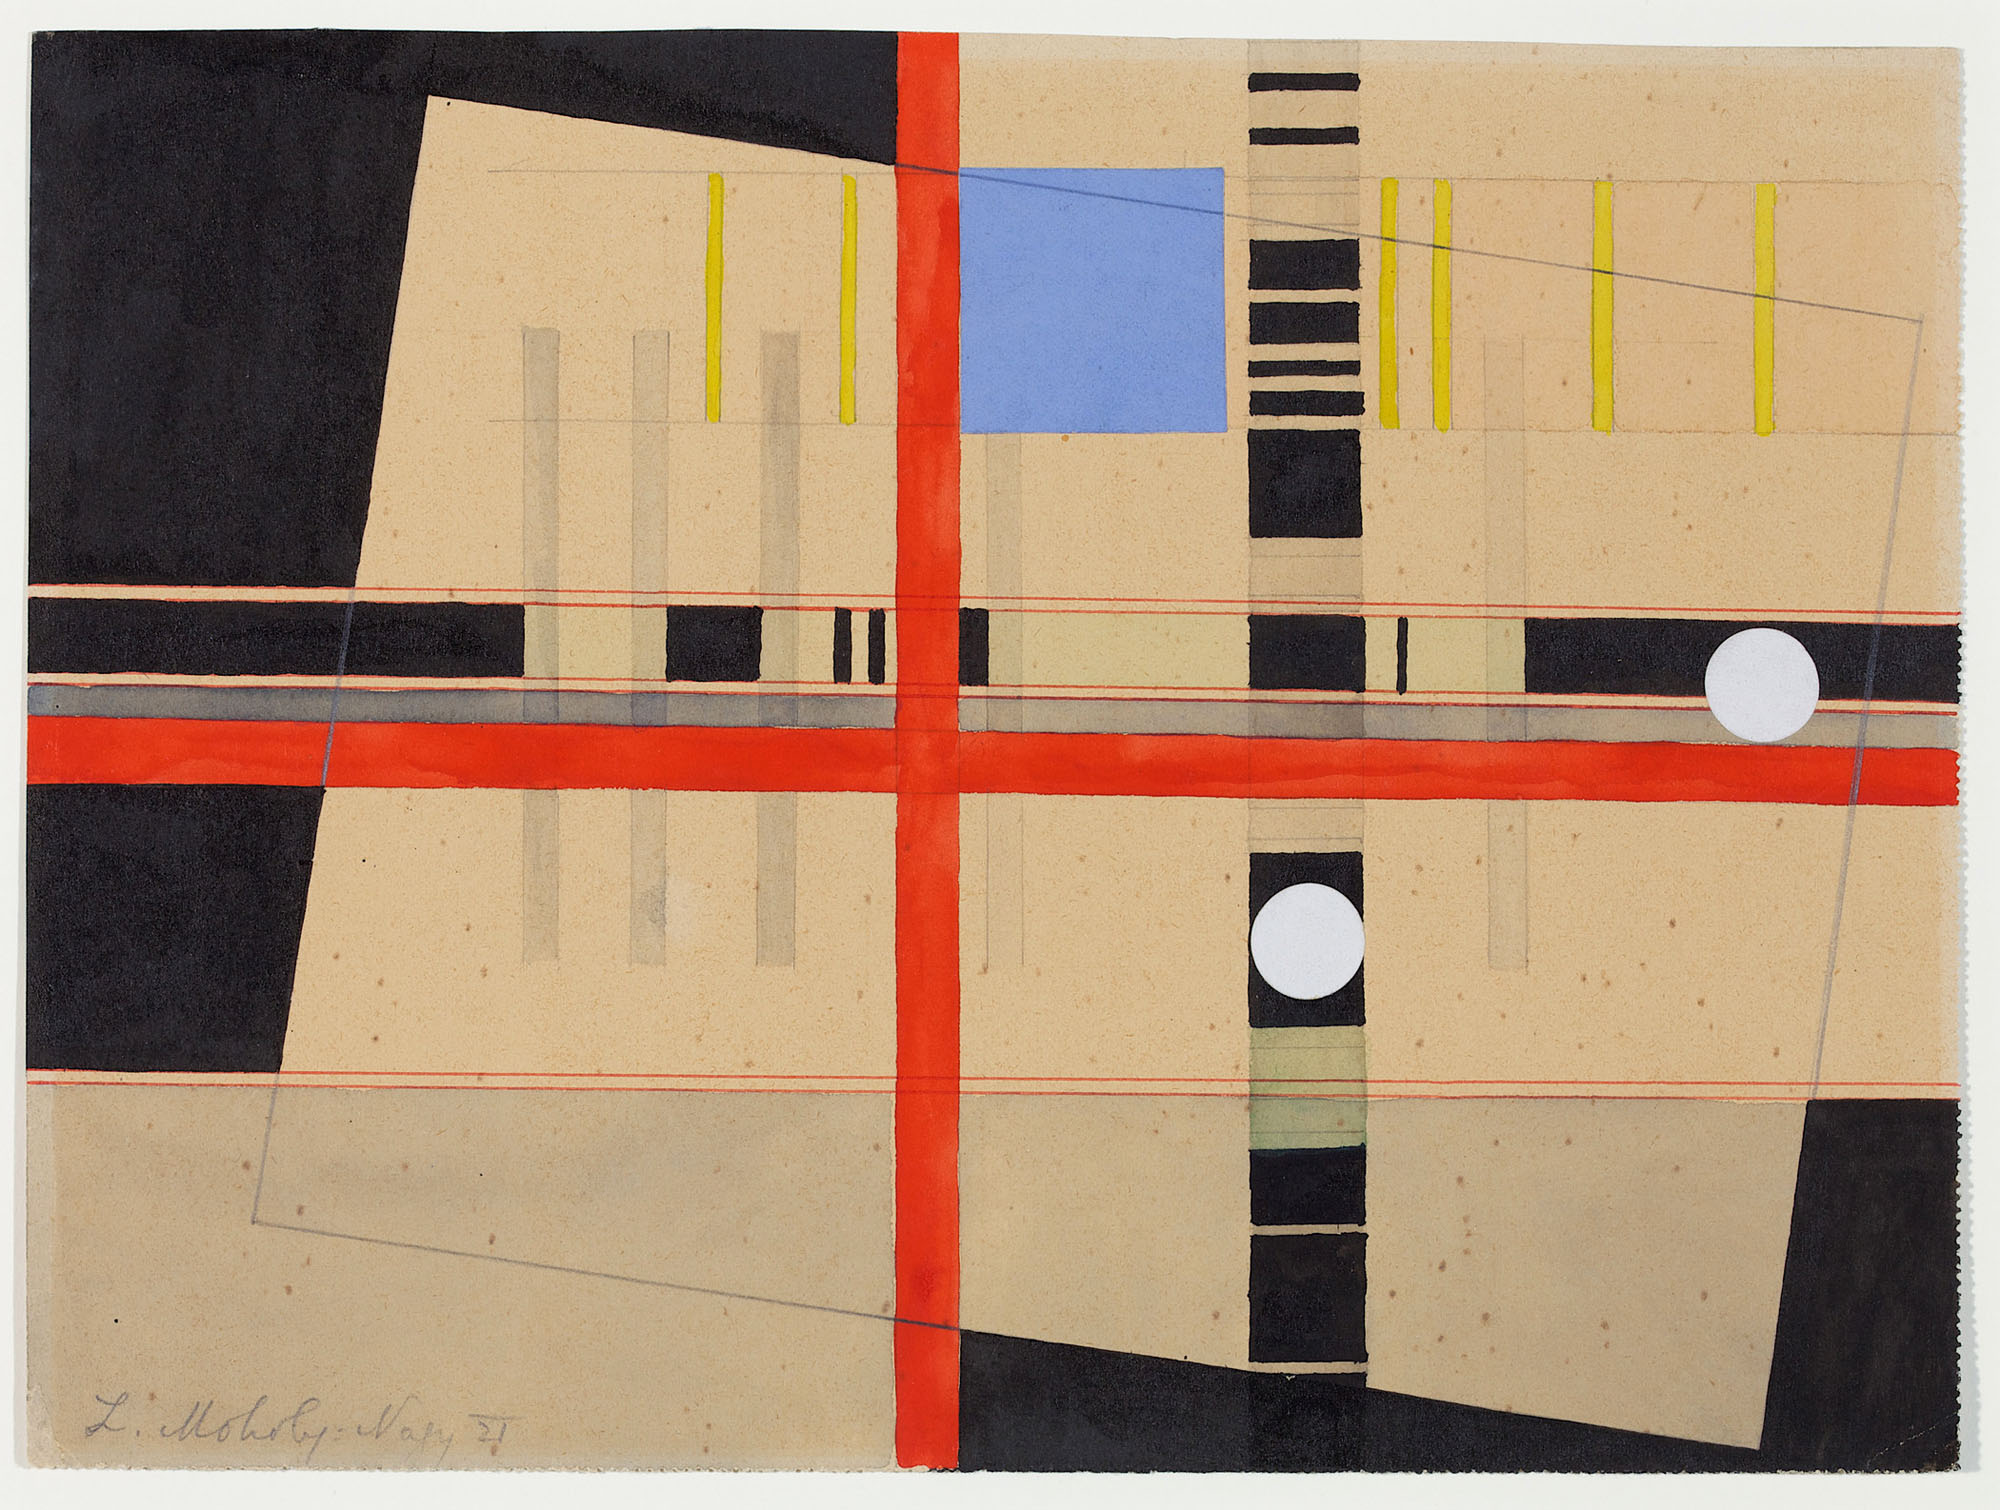 László Moholy-Nagy (Hungarian, 1895-1946) 'Red Cross and White Balls' 1921